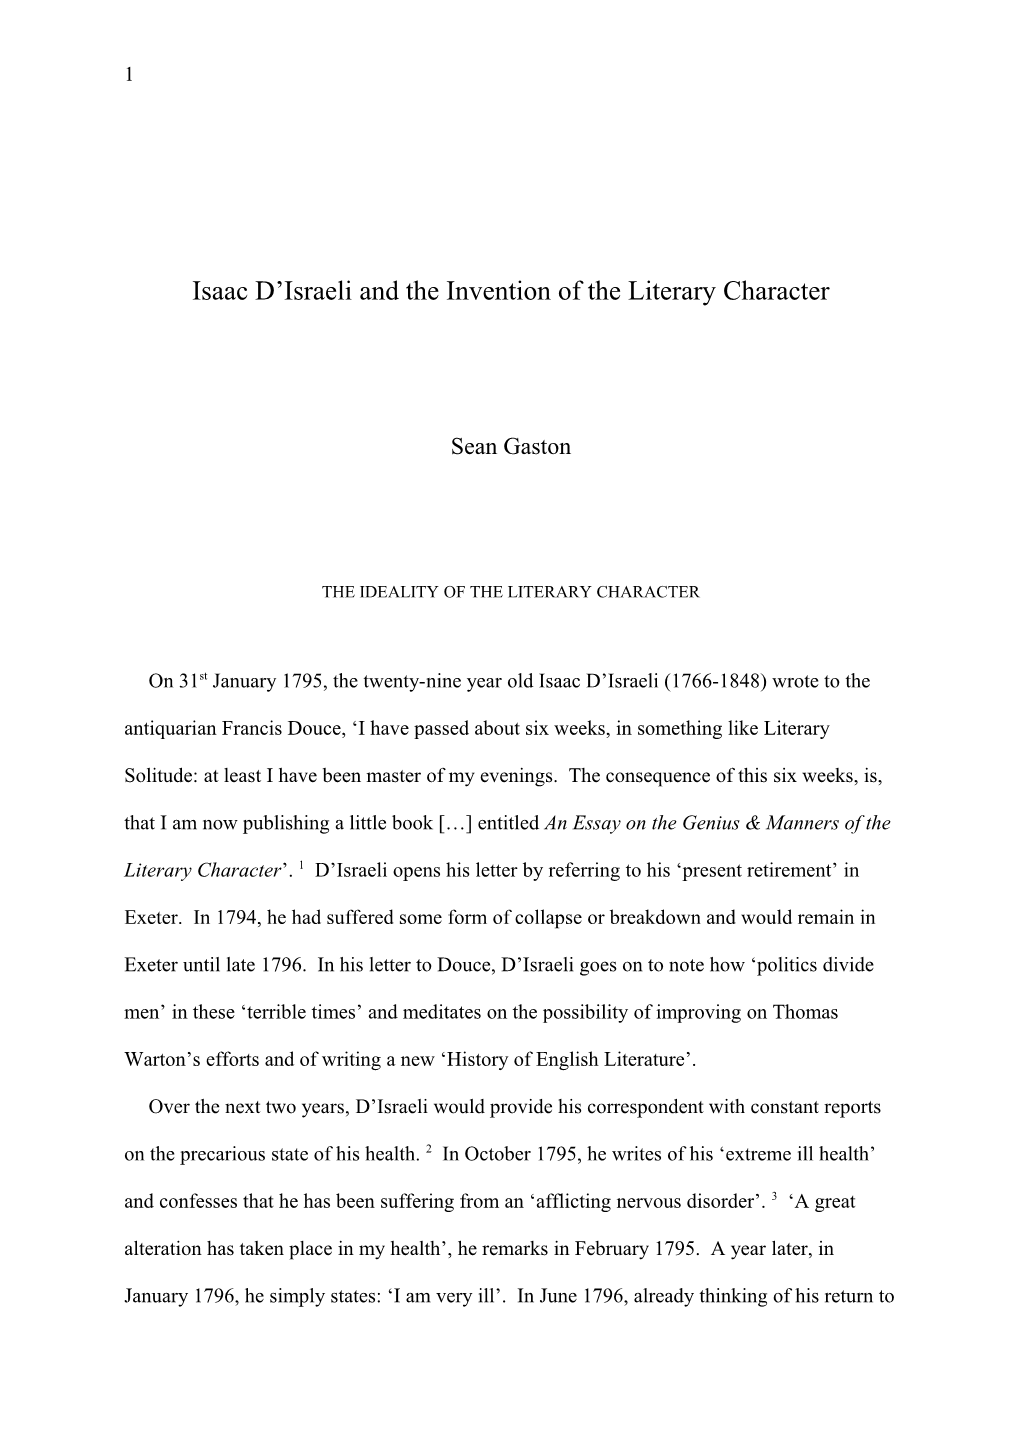 Isaac D Israeli, Rousseau and the Invention of Literary Character